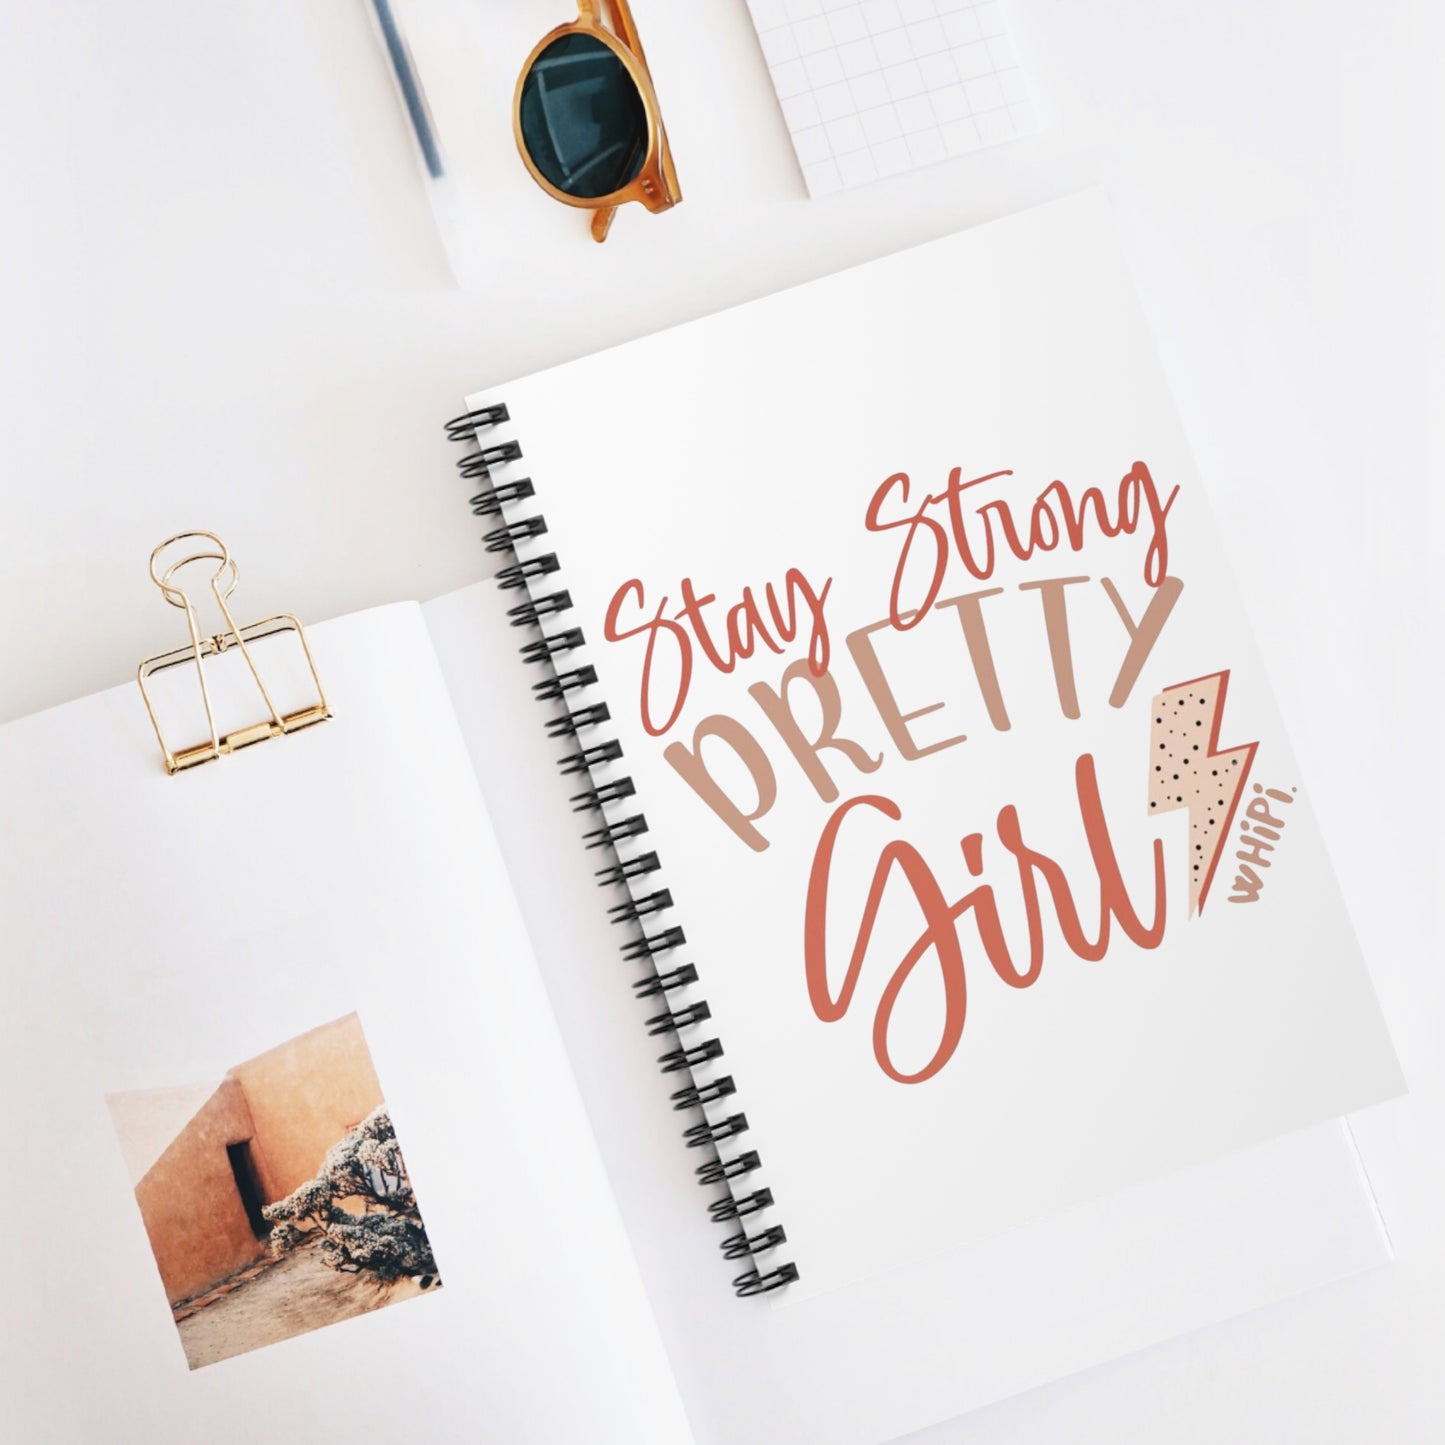 Stay Strong Pretty Girl Journal